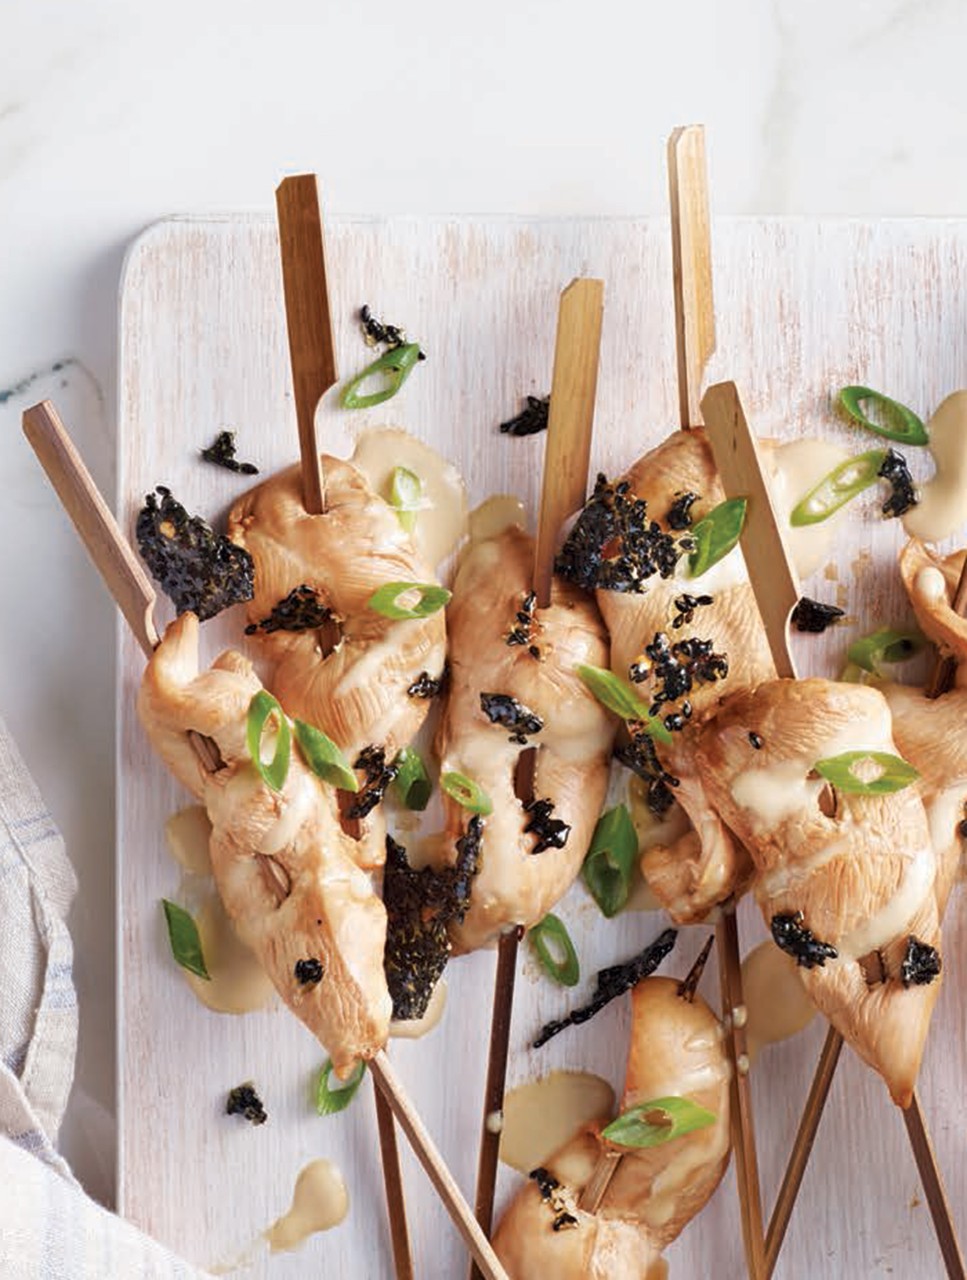 Chicken-Tahini Satay with Spicy Black Sesame Brittle